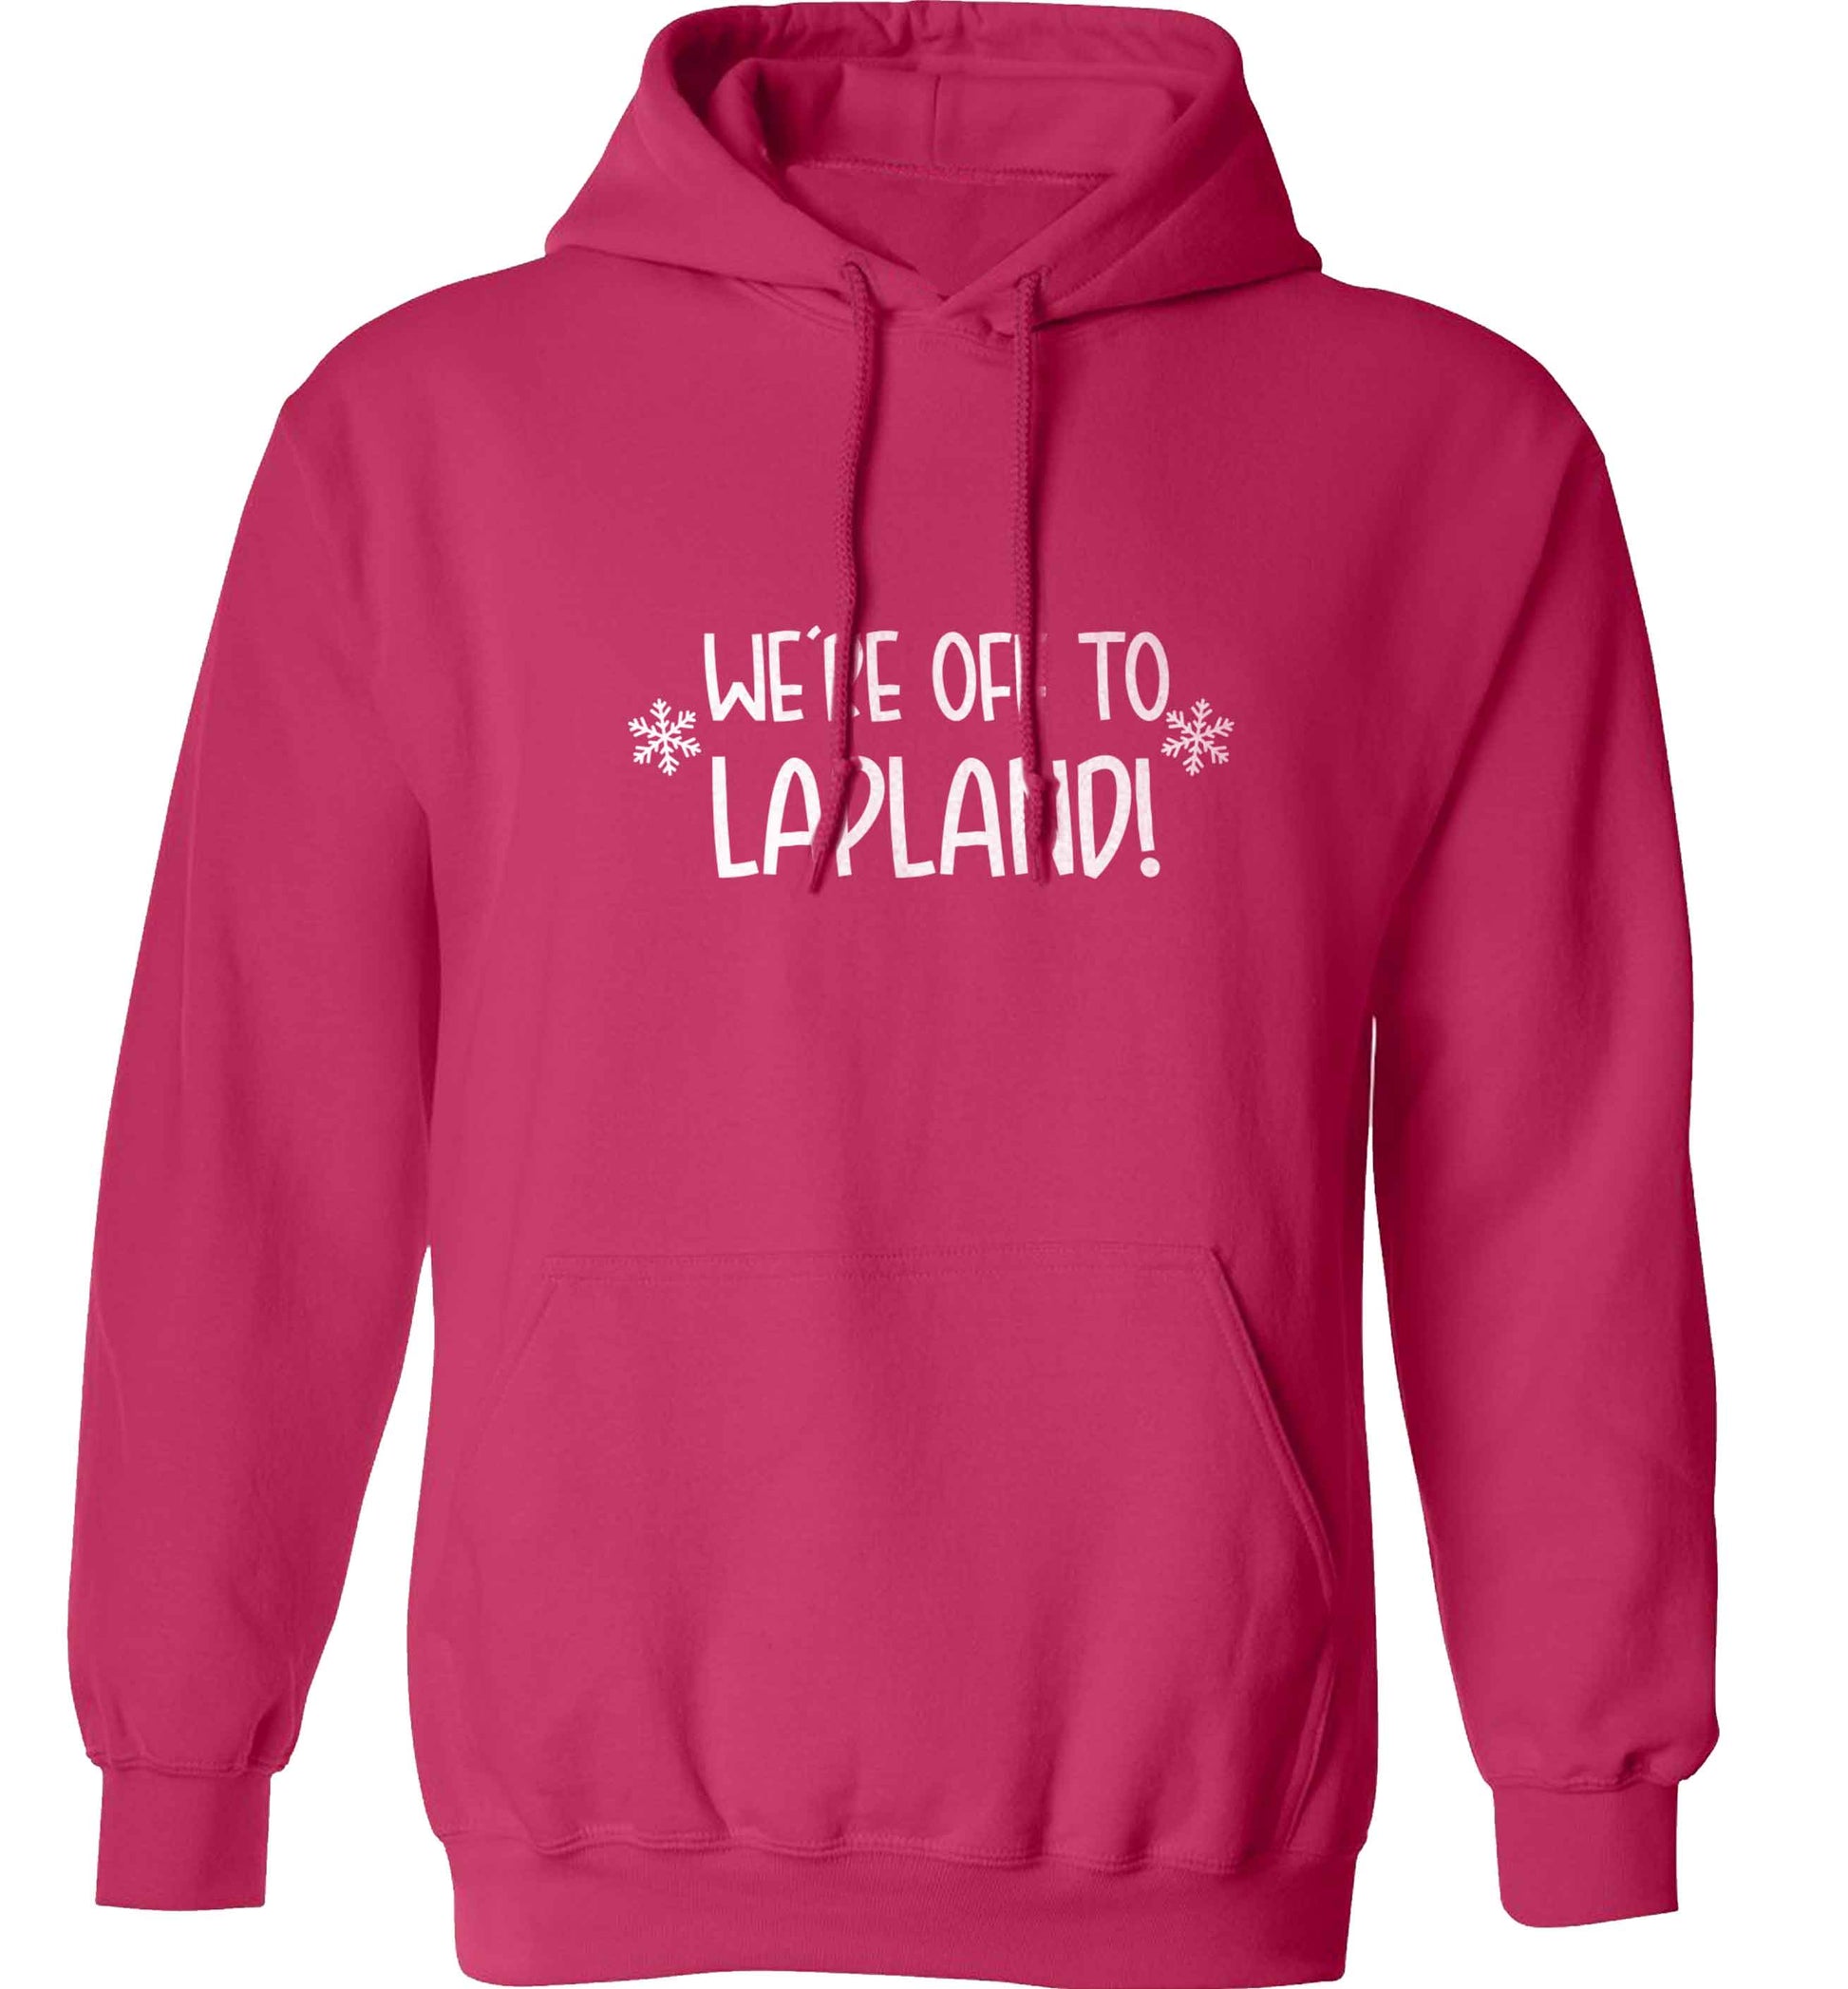 We're off to Lapland adults unisex pink hoodie 2XL